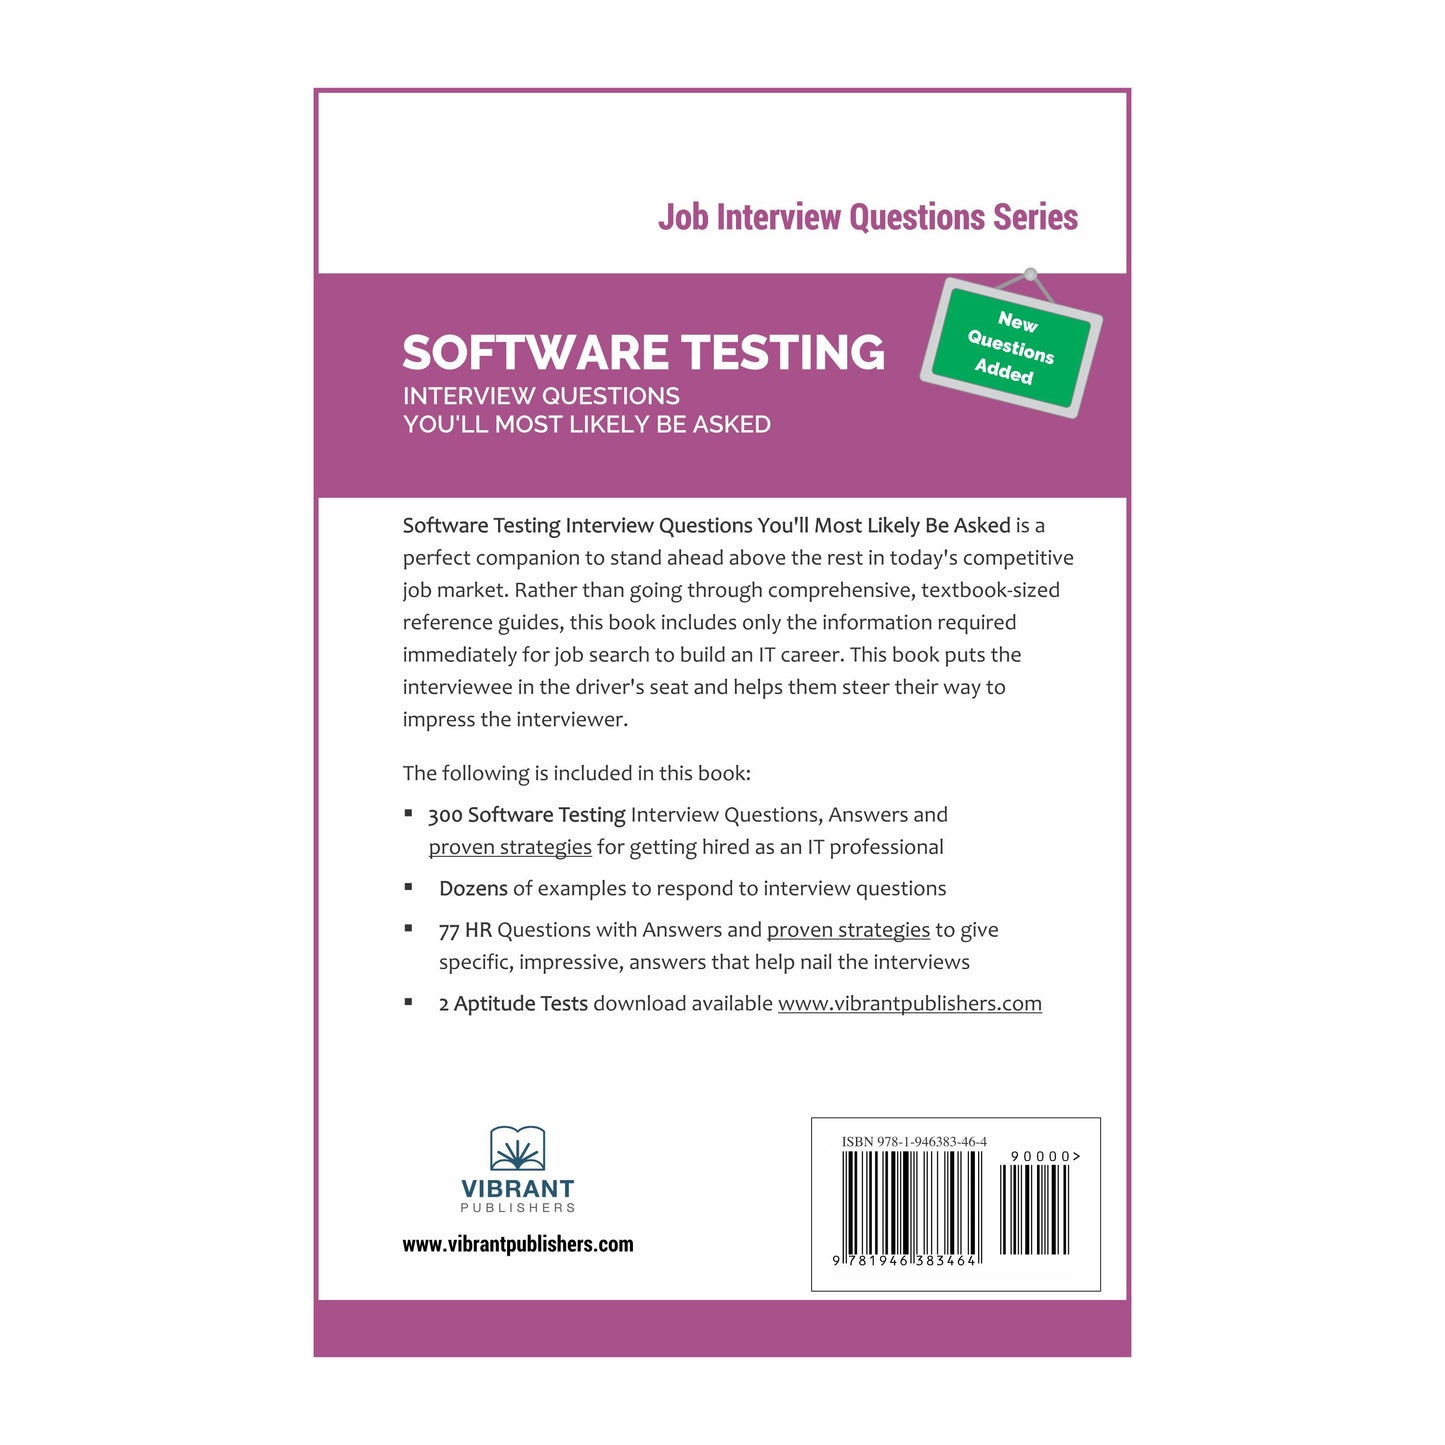 Software Testing Interview Questions You’ll Most Likely Be Asked